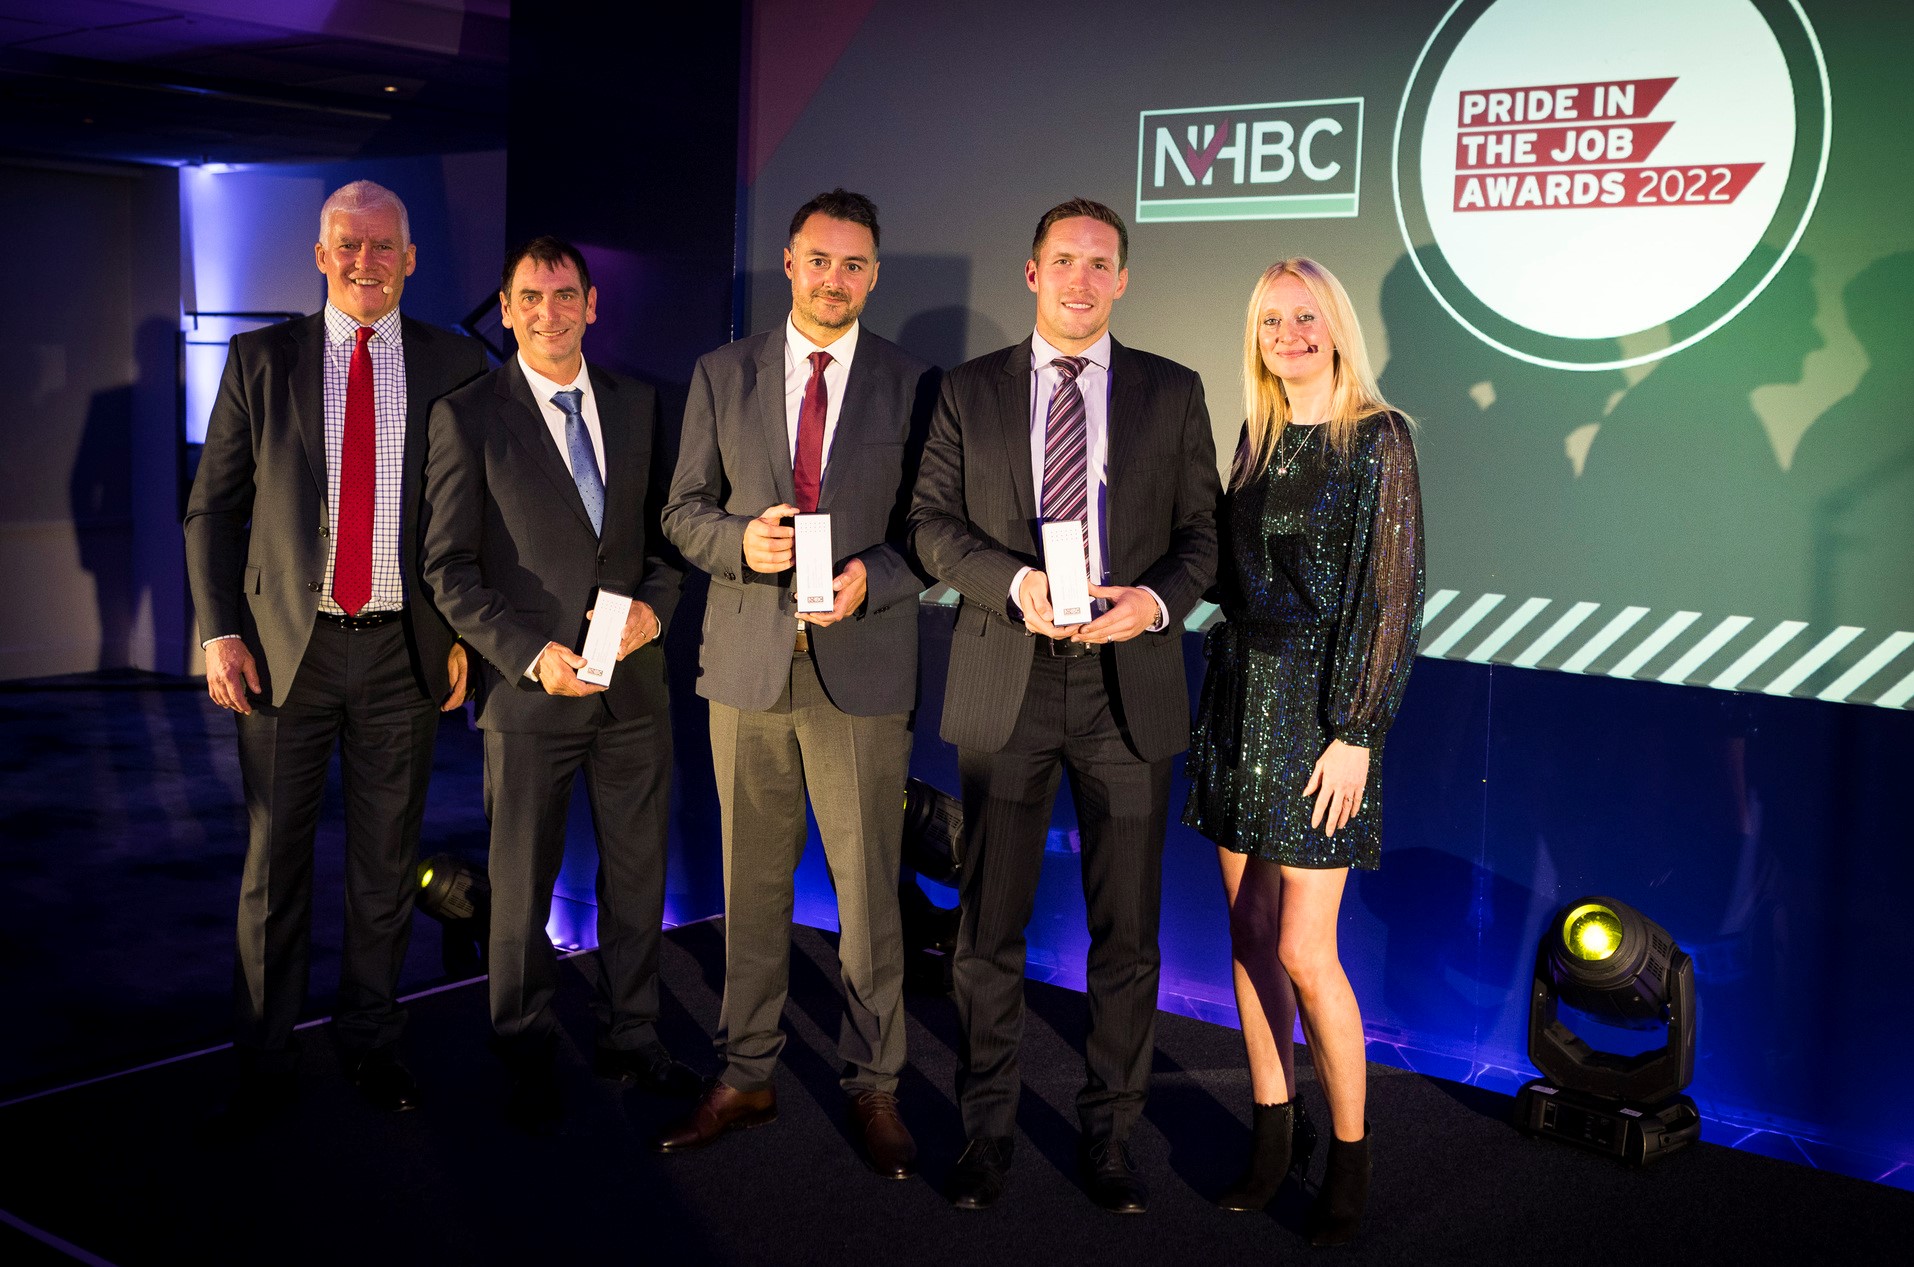 a photo of the south east regional winners at nhbc's pij awards 2022